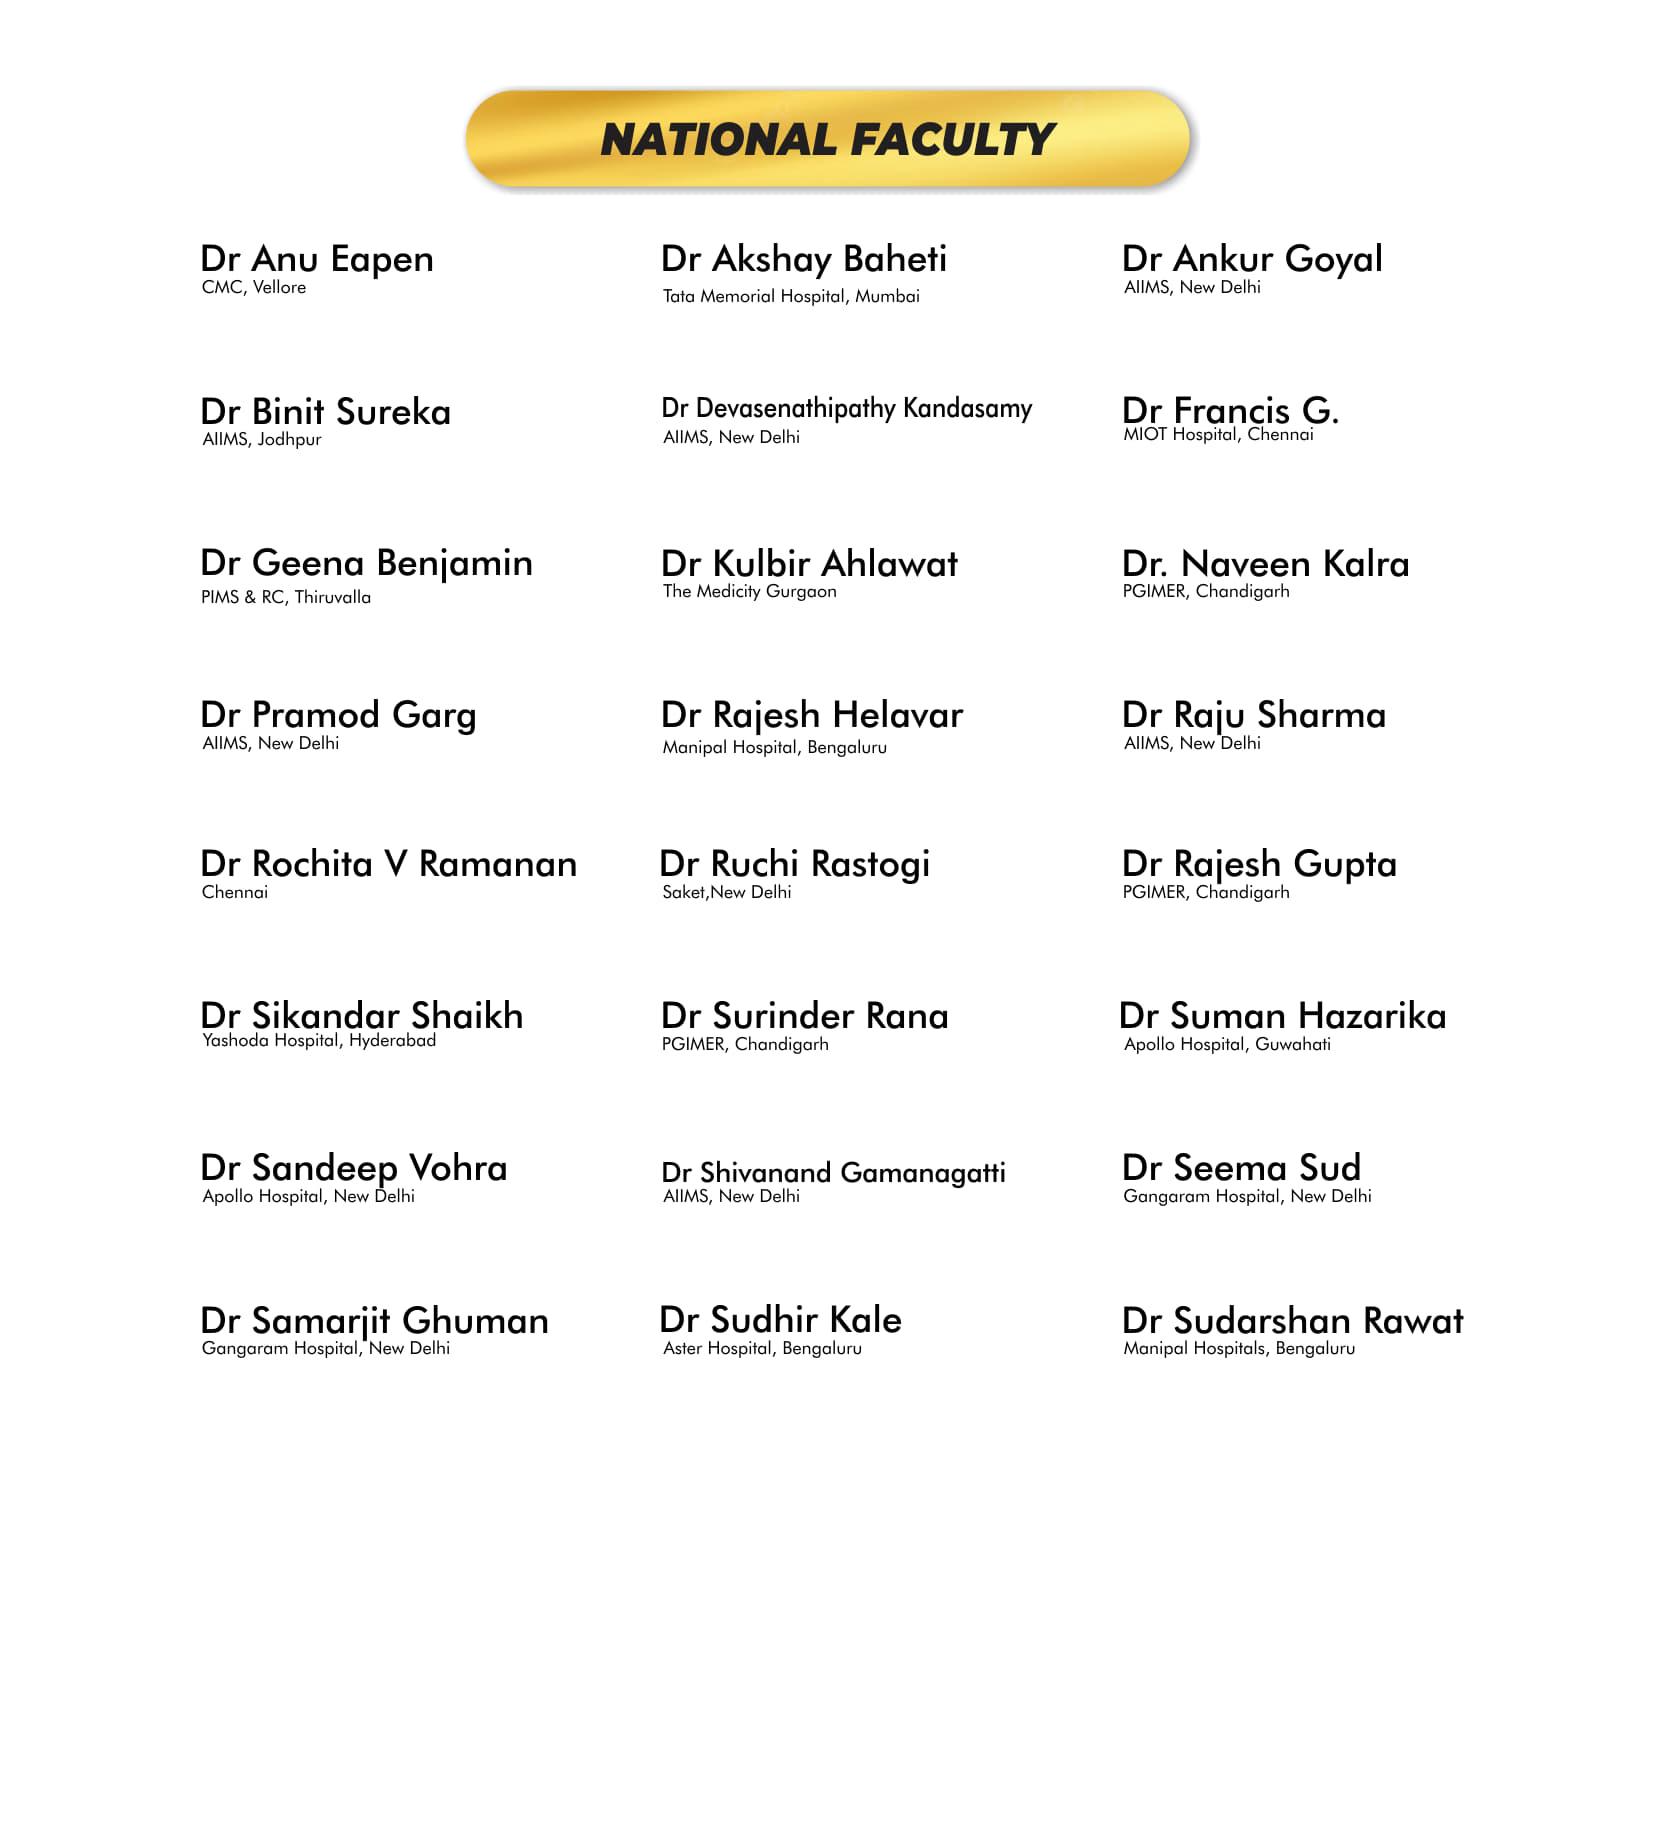 National Faculty